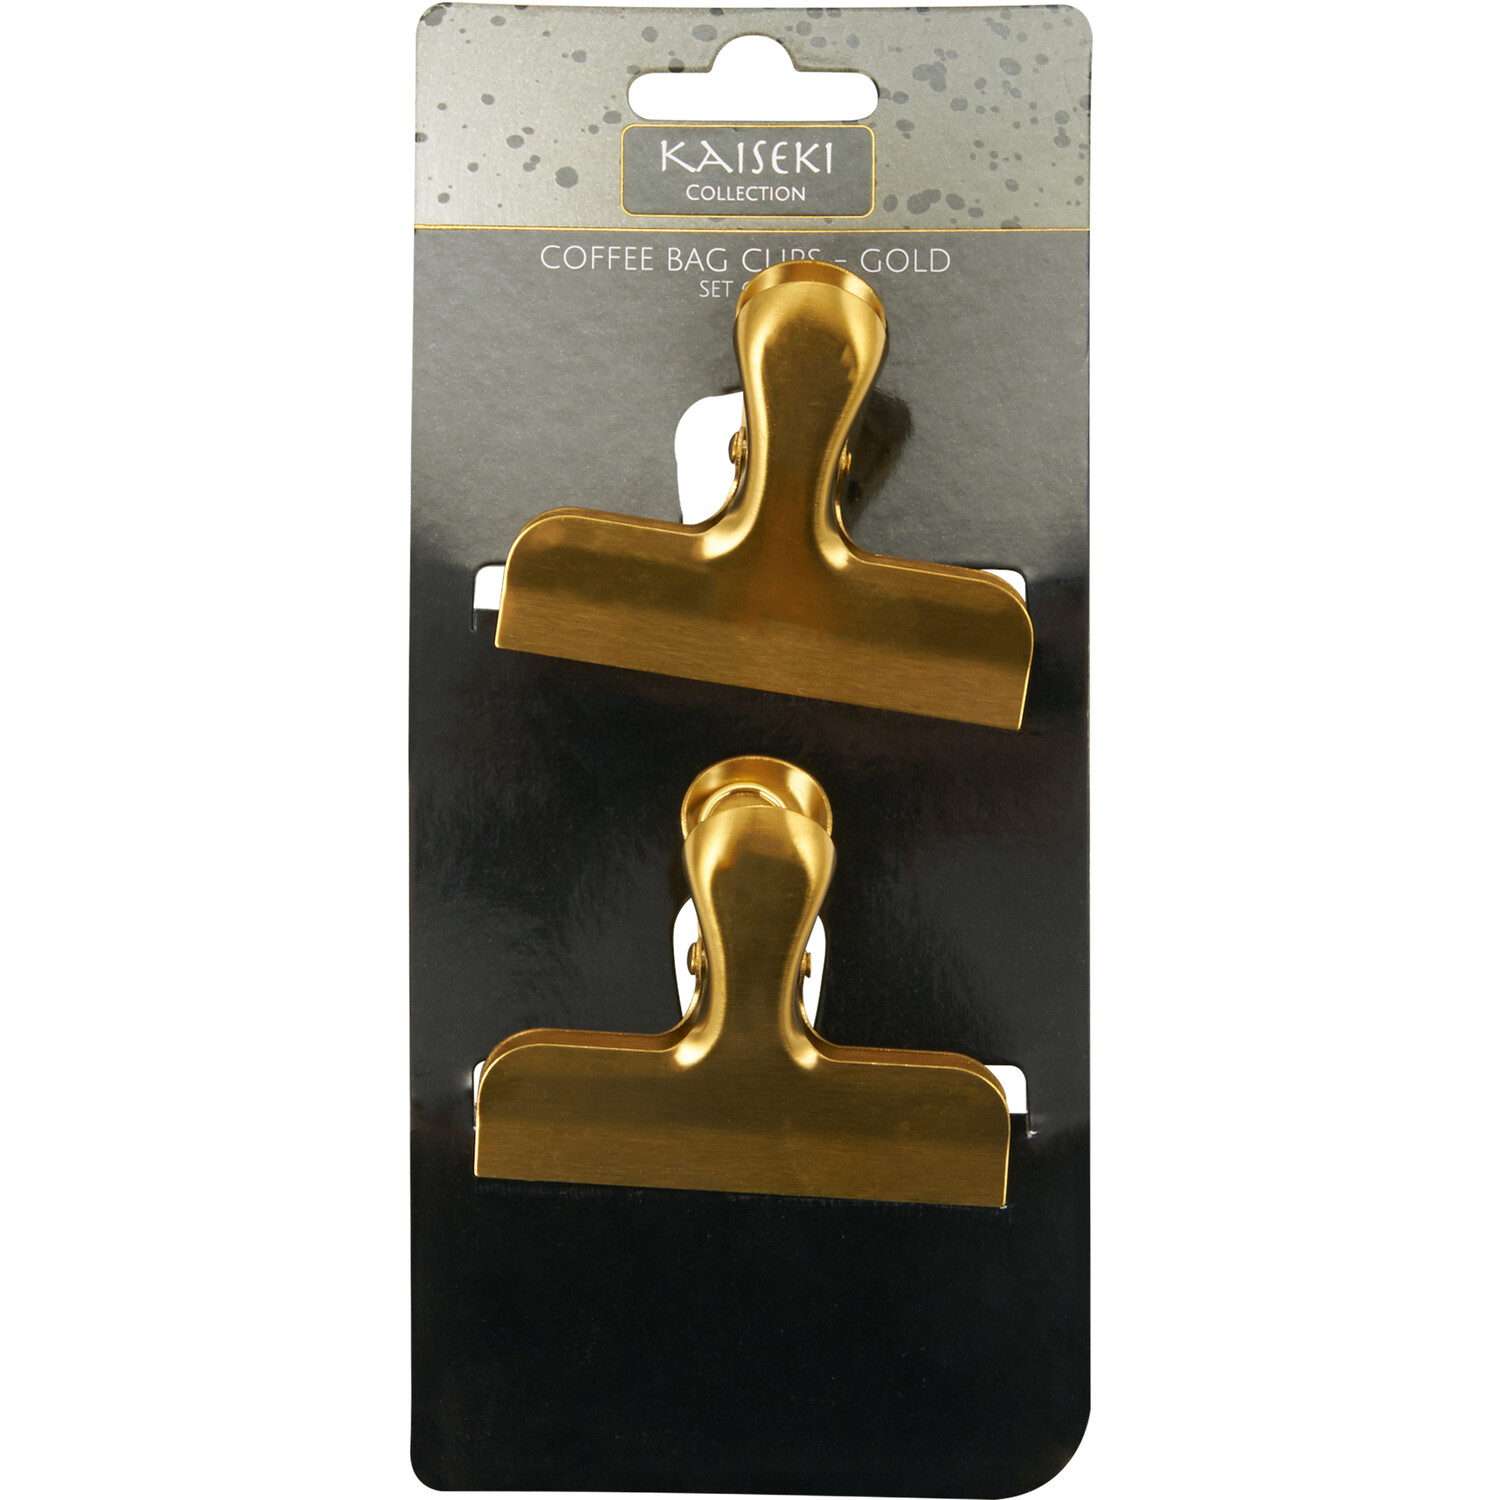 Pack of 2 Kaiseki Coffee Bag Clips - Gold Image 1